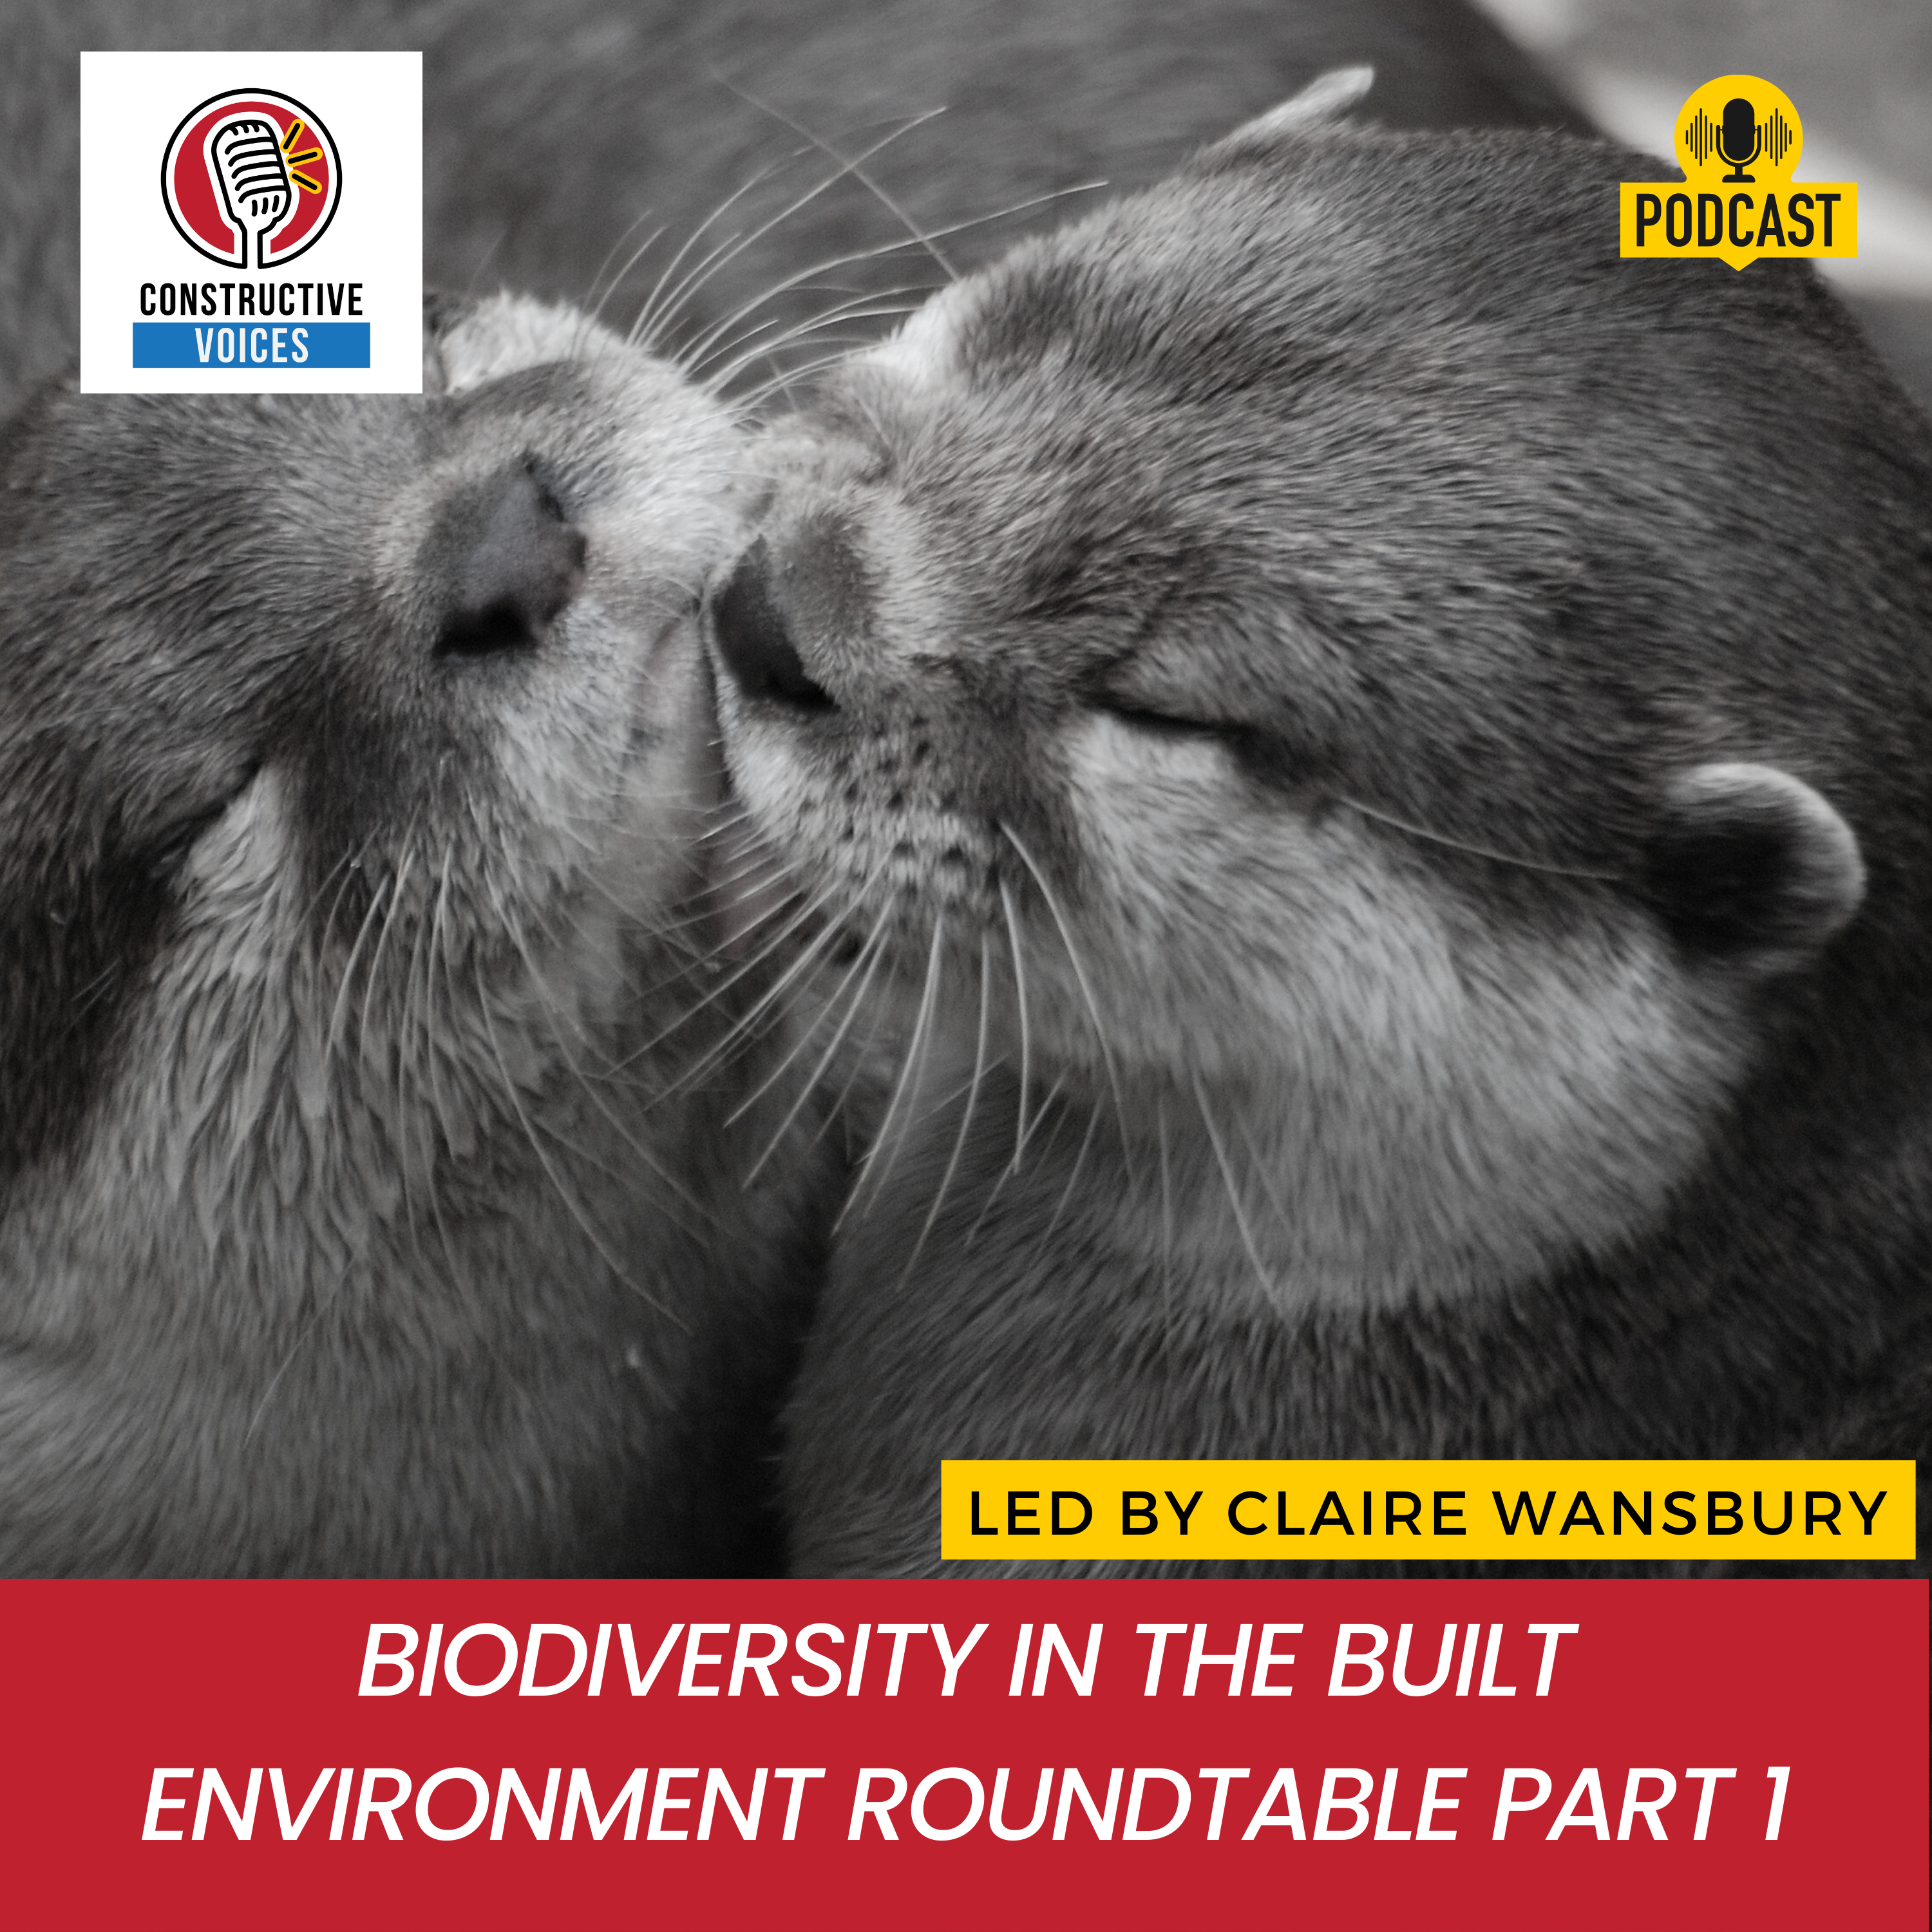 Biodiversity in the Built Environment Roundtable Part 1